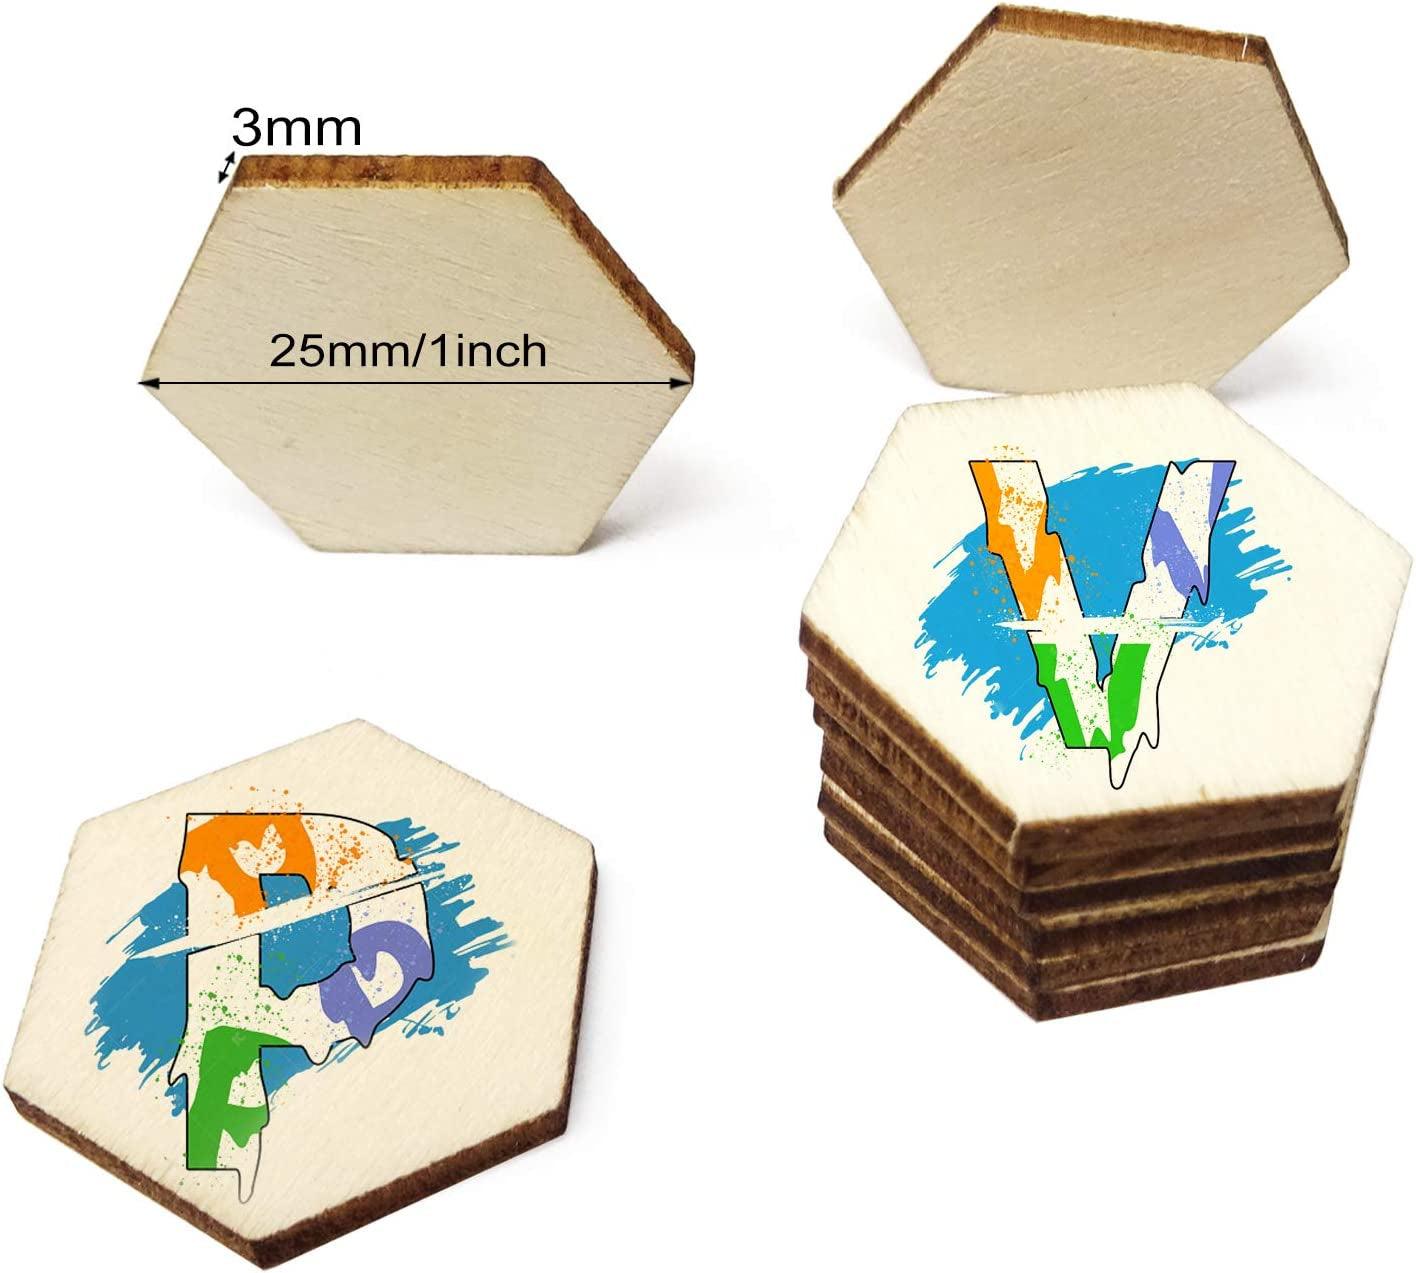 50pcs 40mm Unfinished Wood Pieces Hexagon Shape Natural Blank Wood Cutout  Wood Chips Slices for DIY